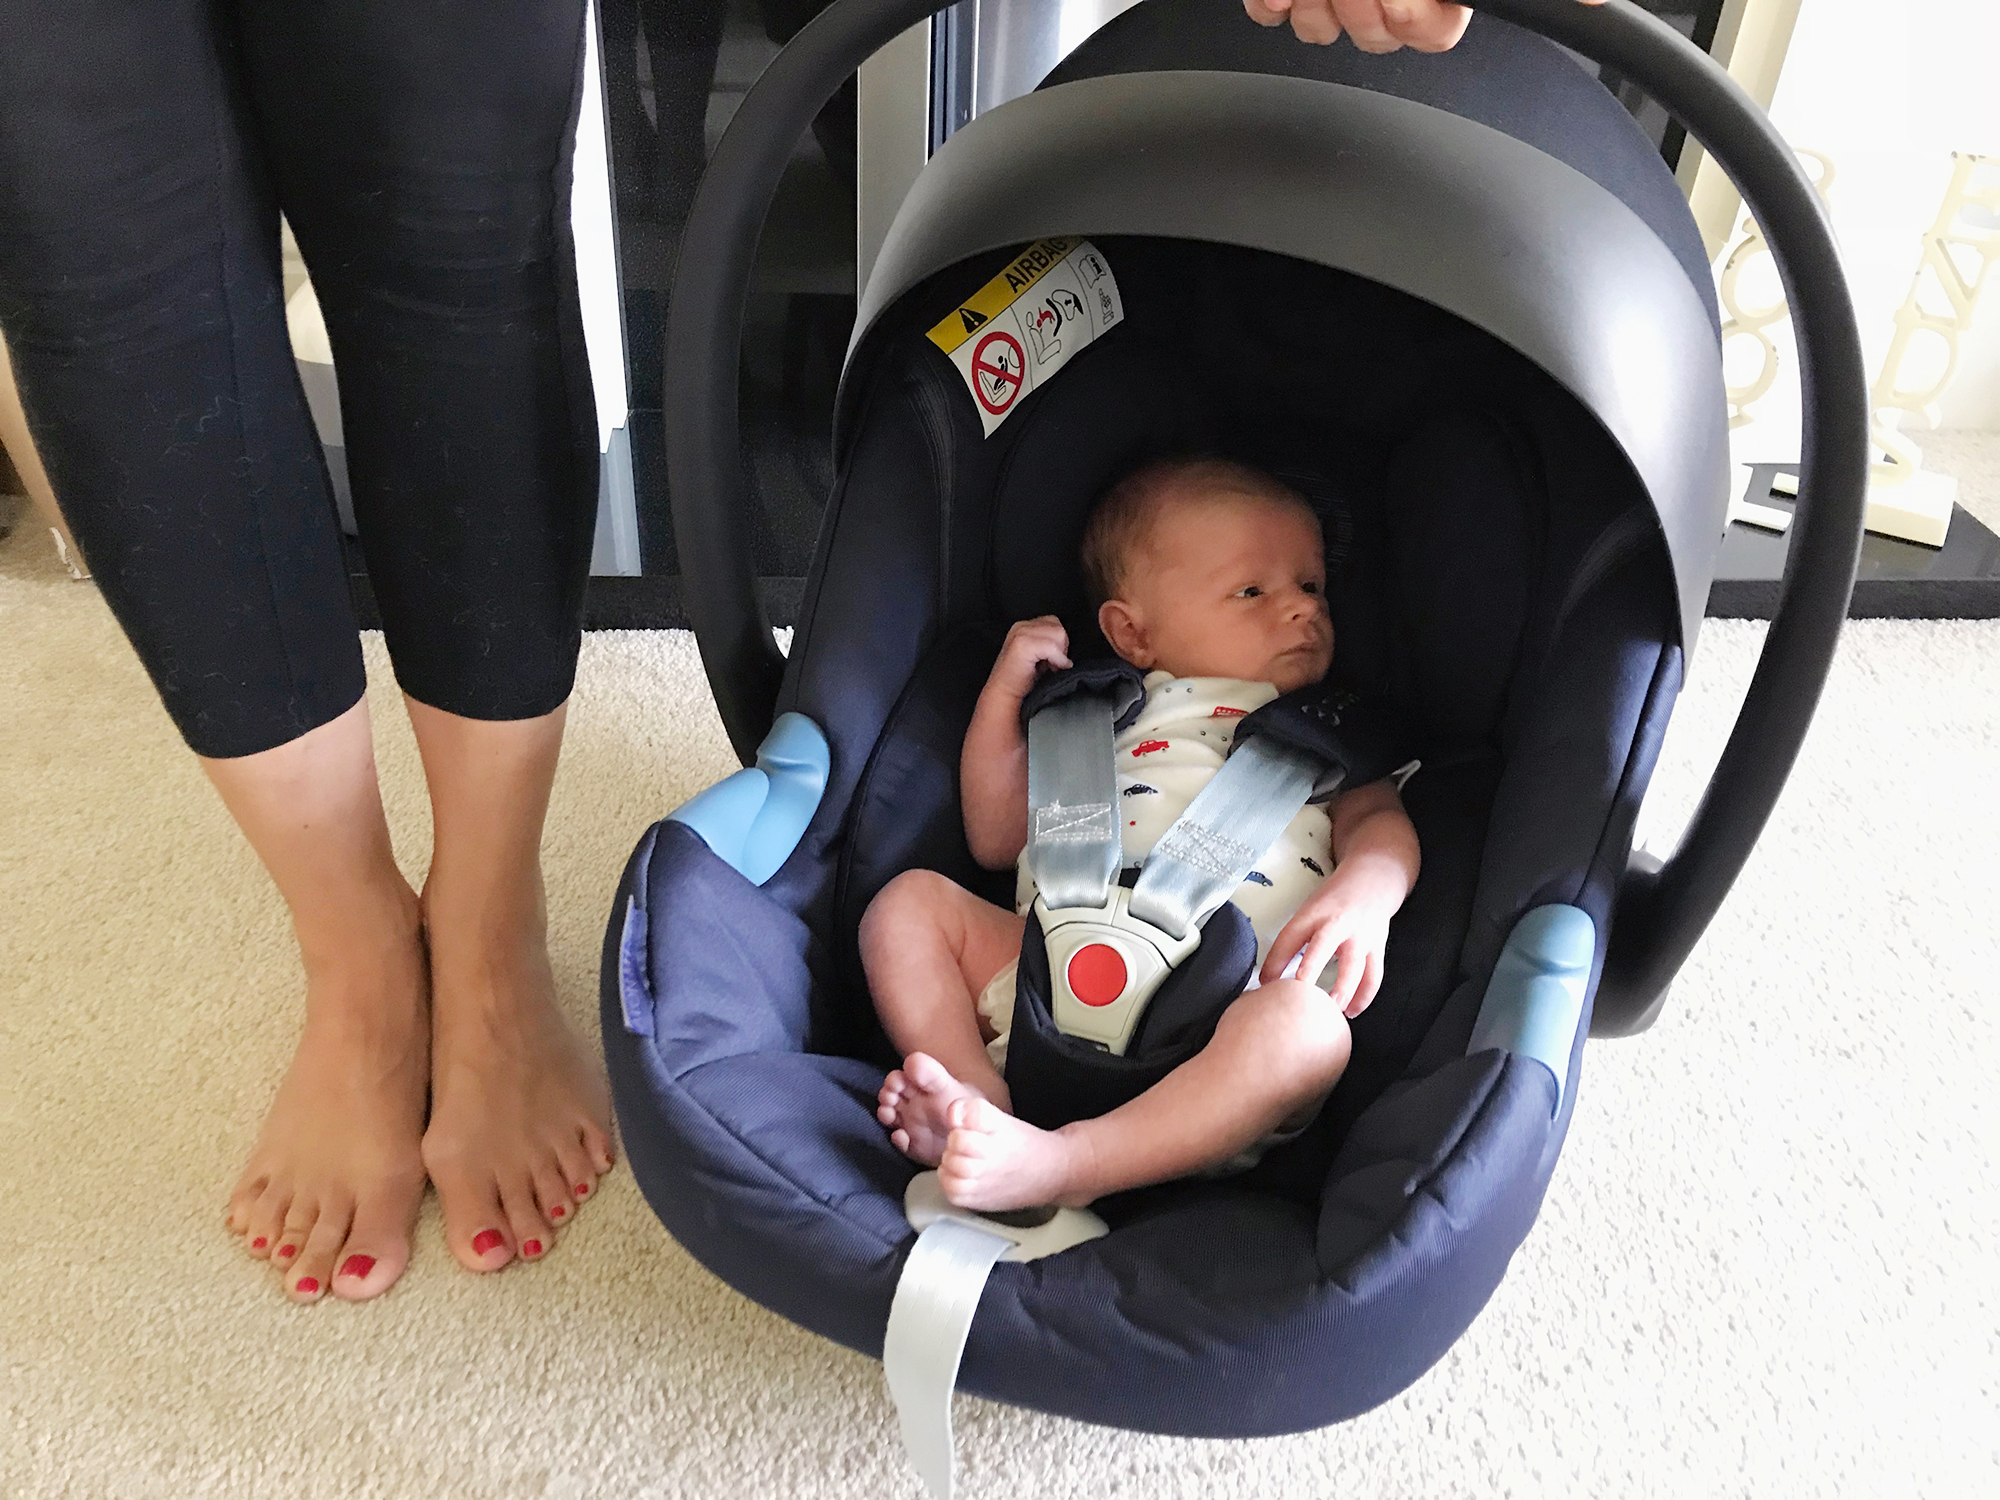 A newborn baby in a Cybex infant carrier car seat